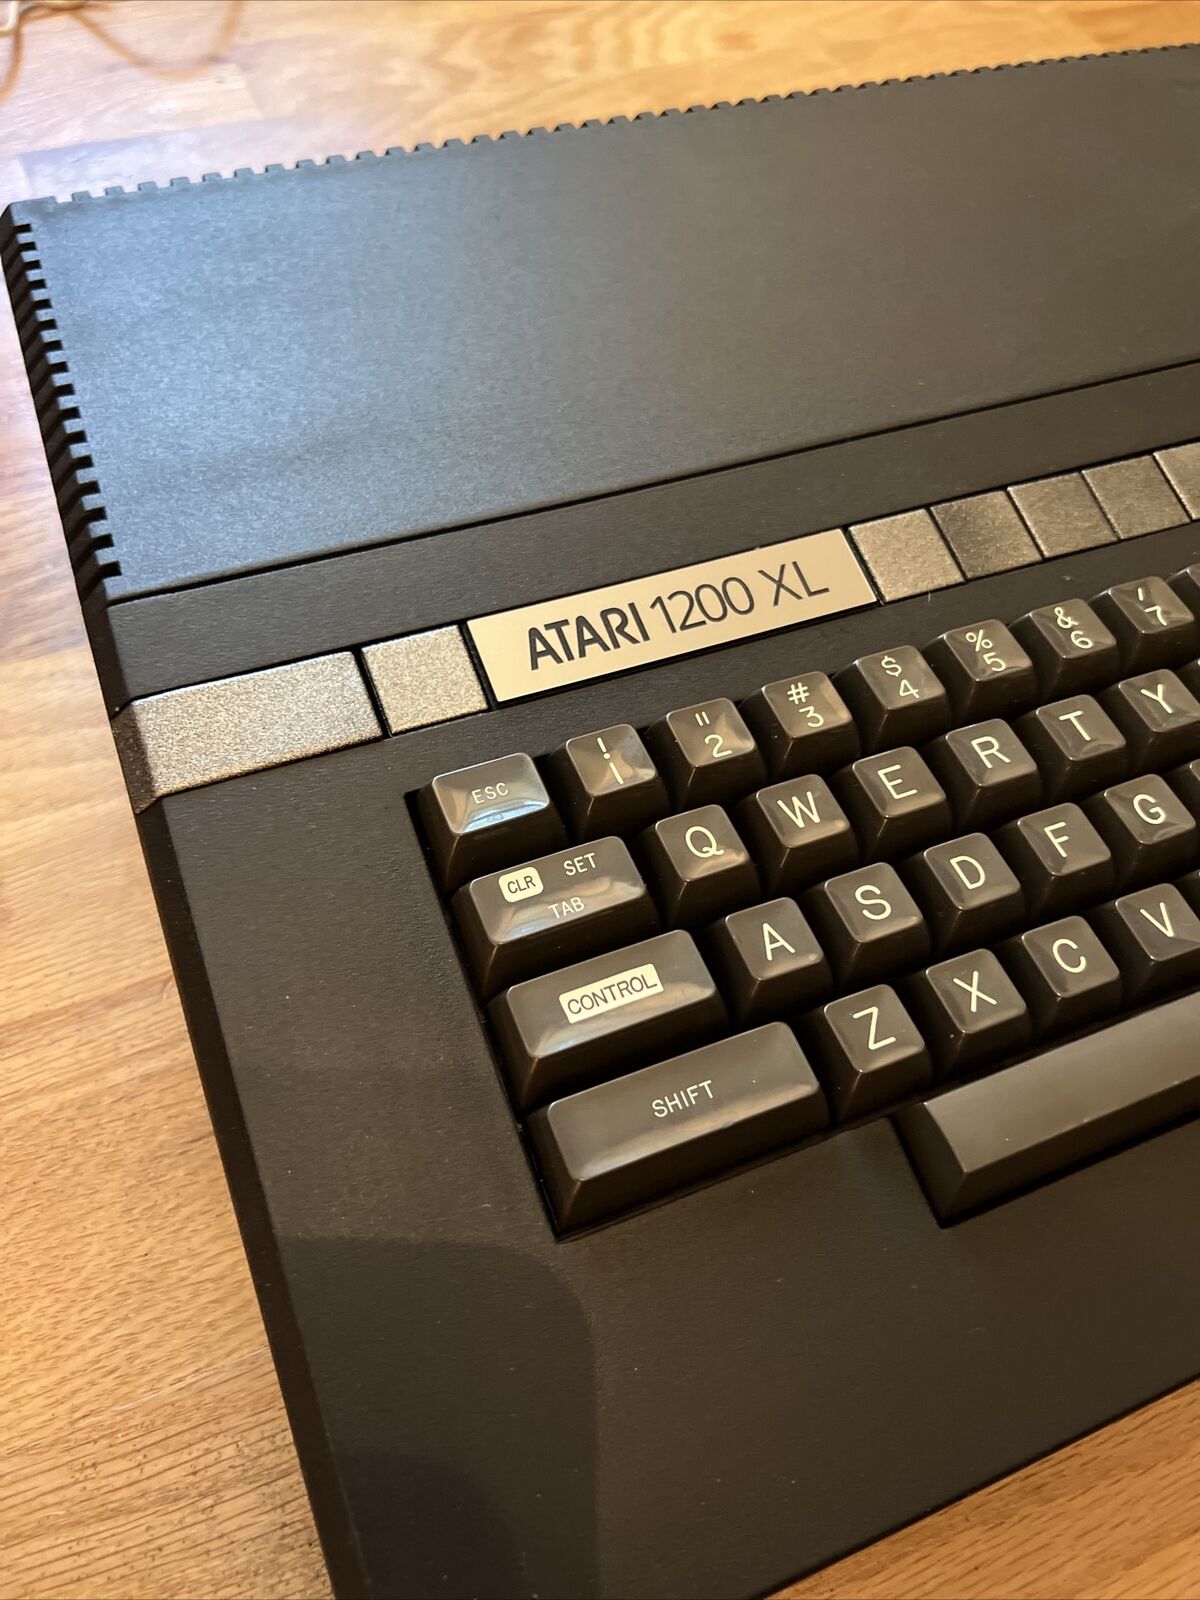 Atari 1200xl computer, customized, in excellent shape